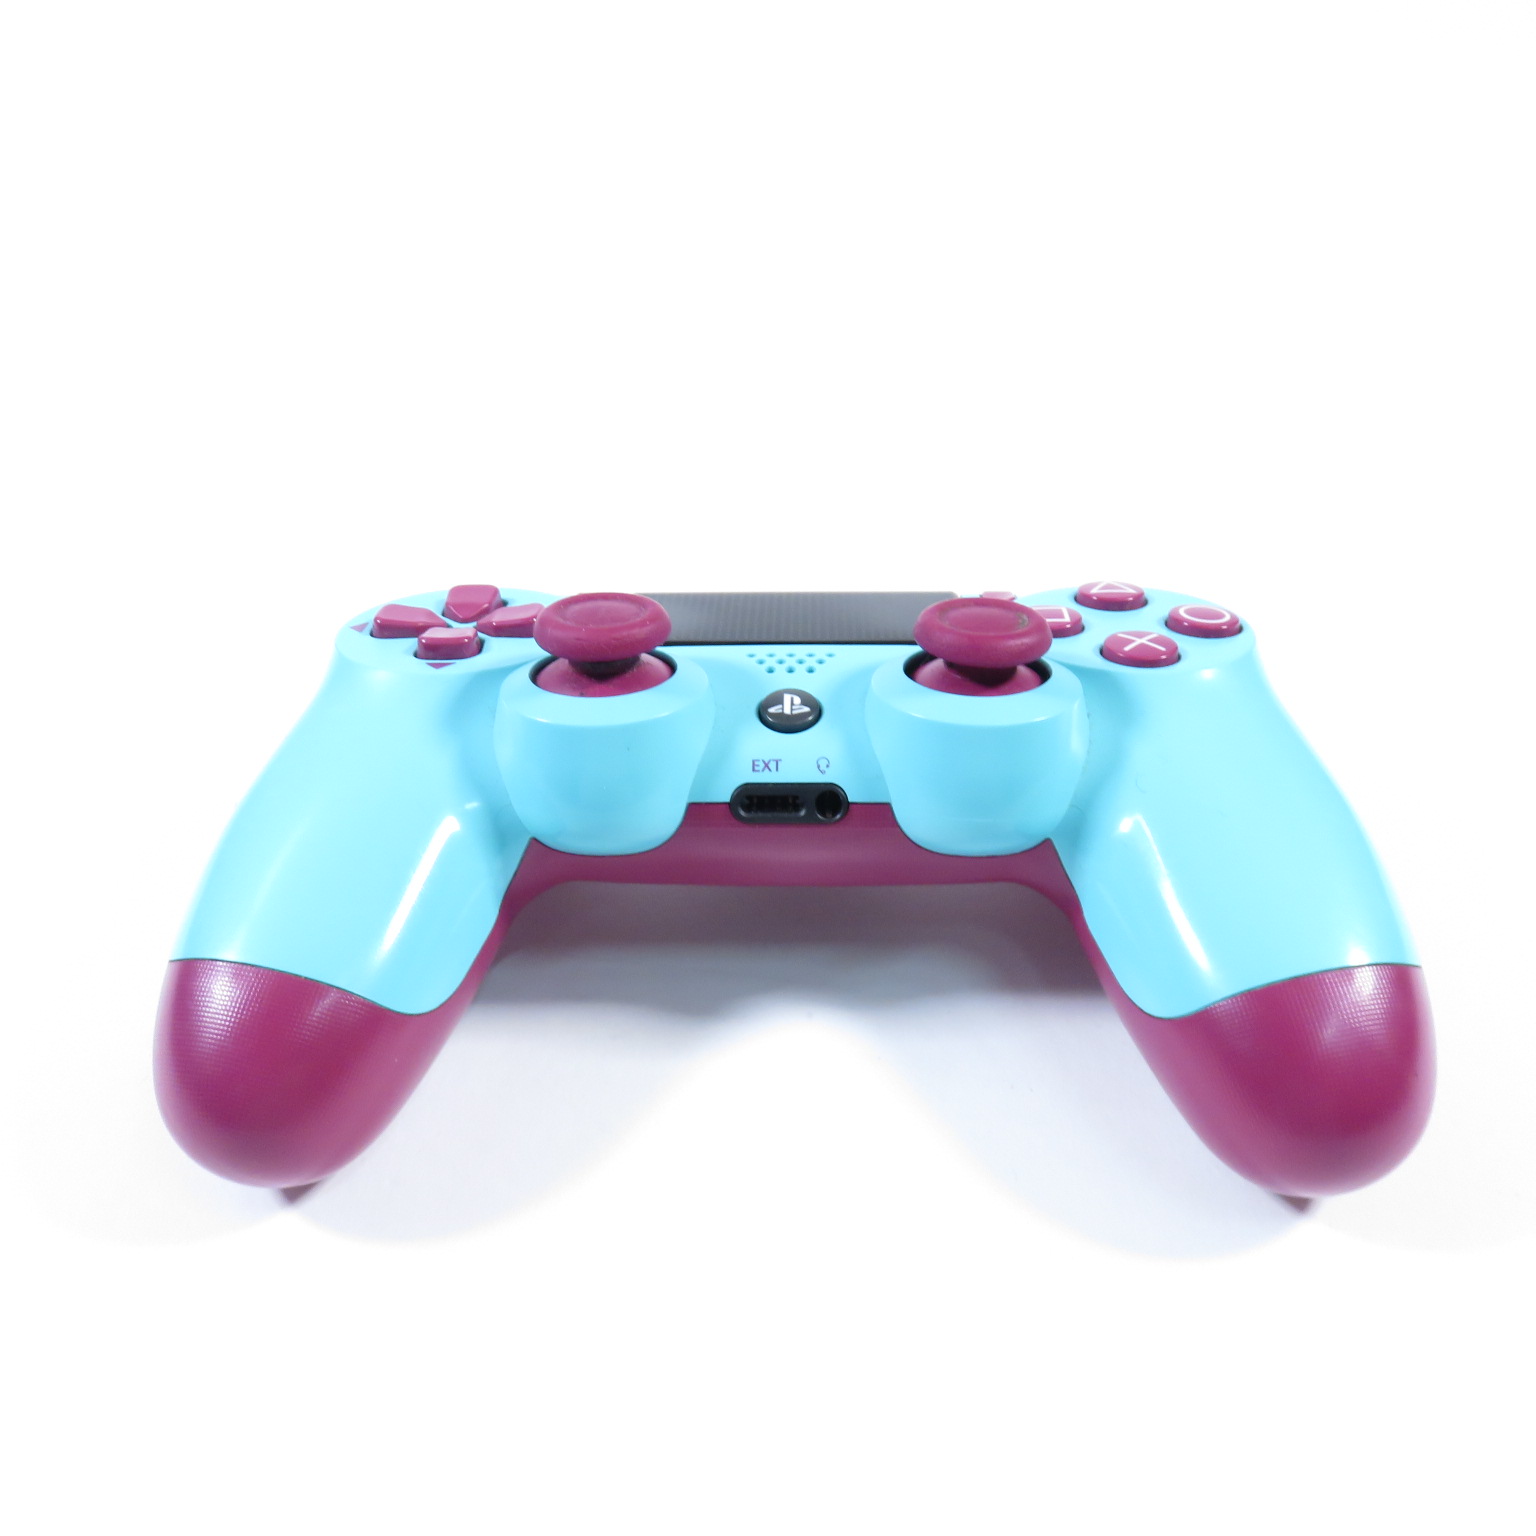  DualShock 4 Wireless Controller for PlayStation 4 - Berry Blue  : Video Games